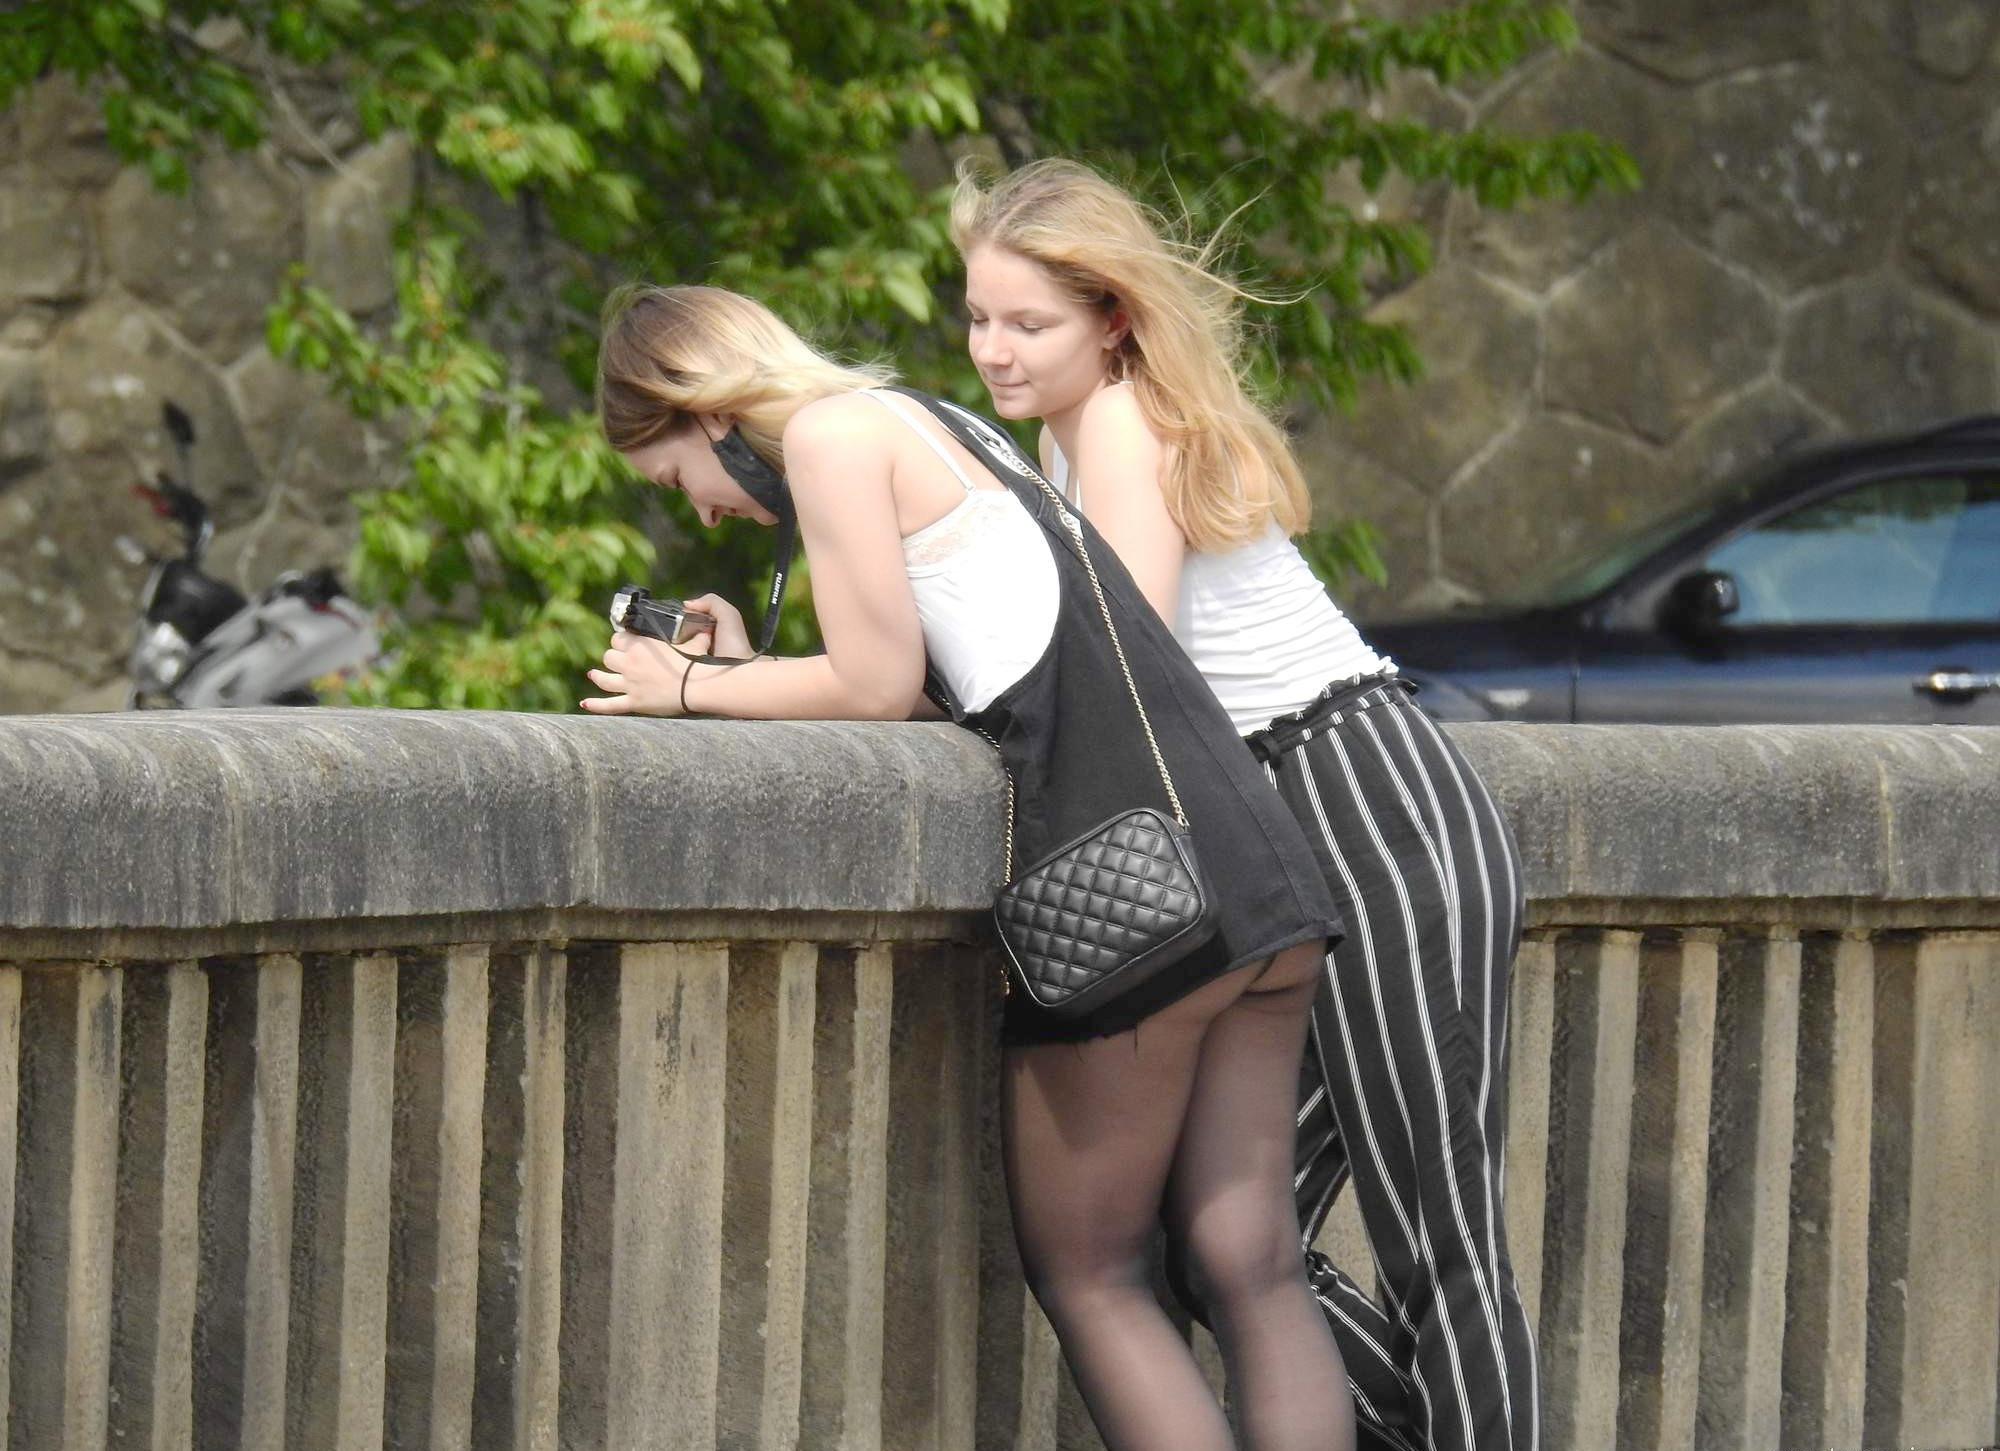 Two hot candid in the park and upskirt.